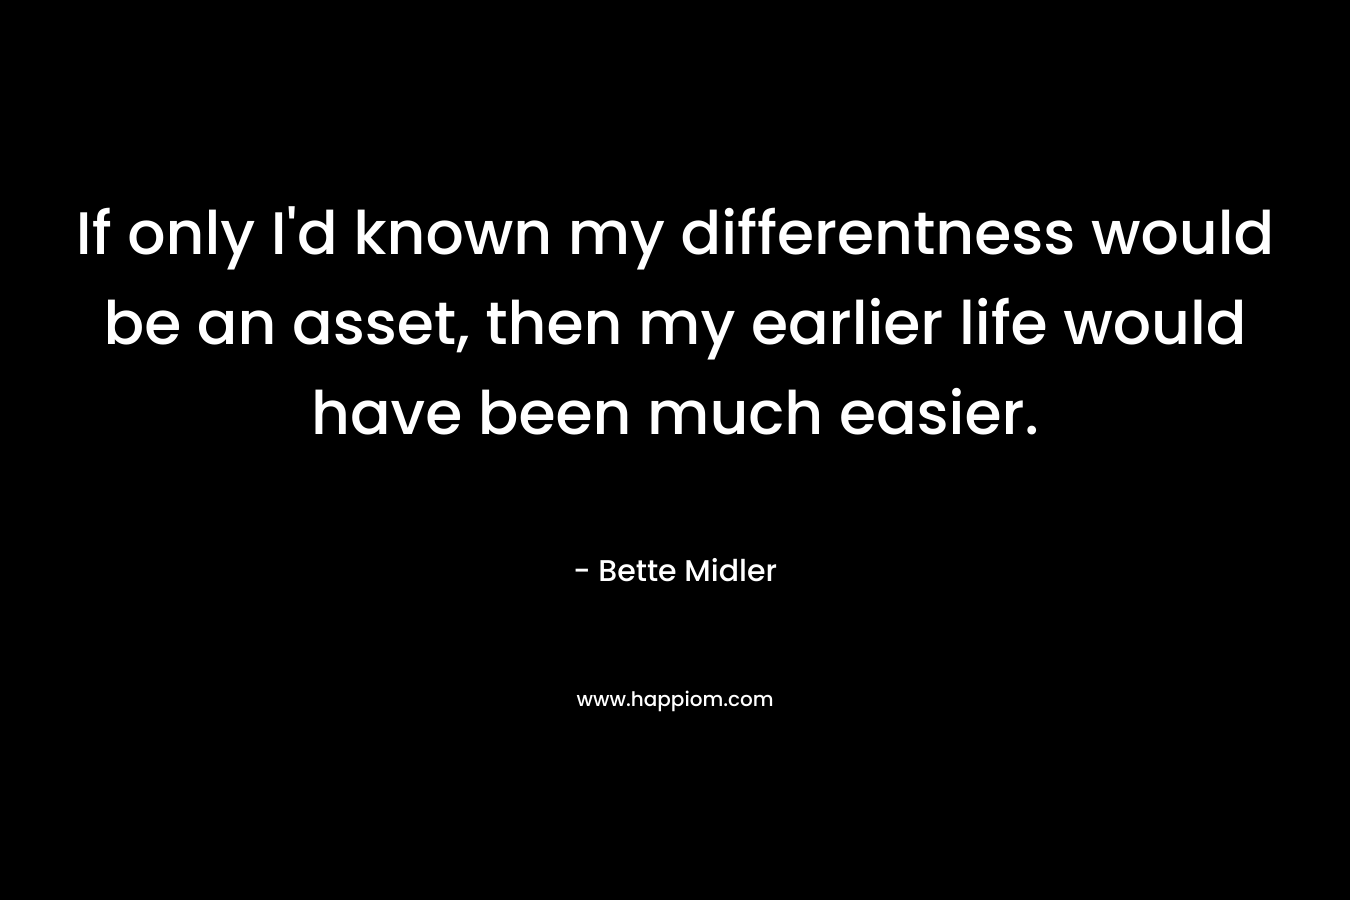 If only I'd known my differentness would be an asset, then my earlier life would have been much easier.